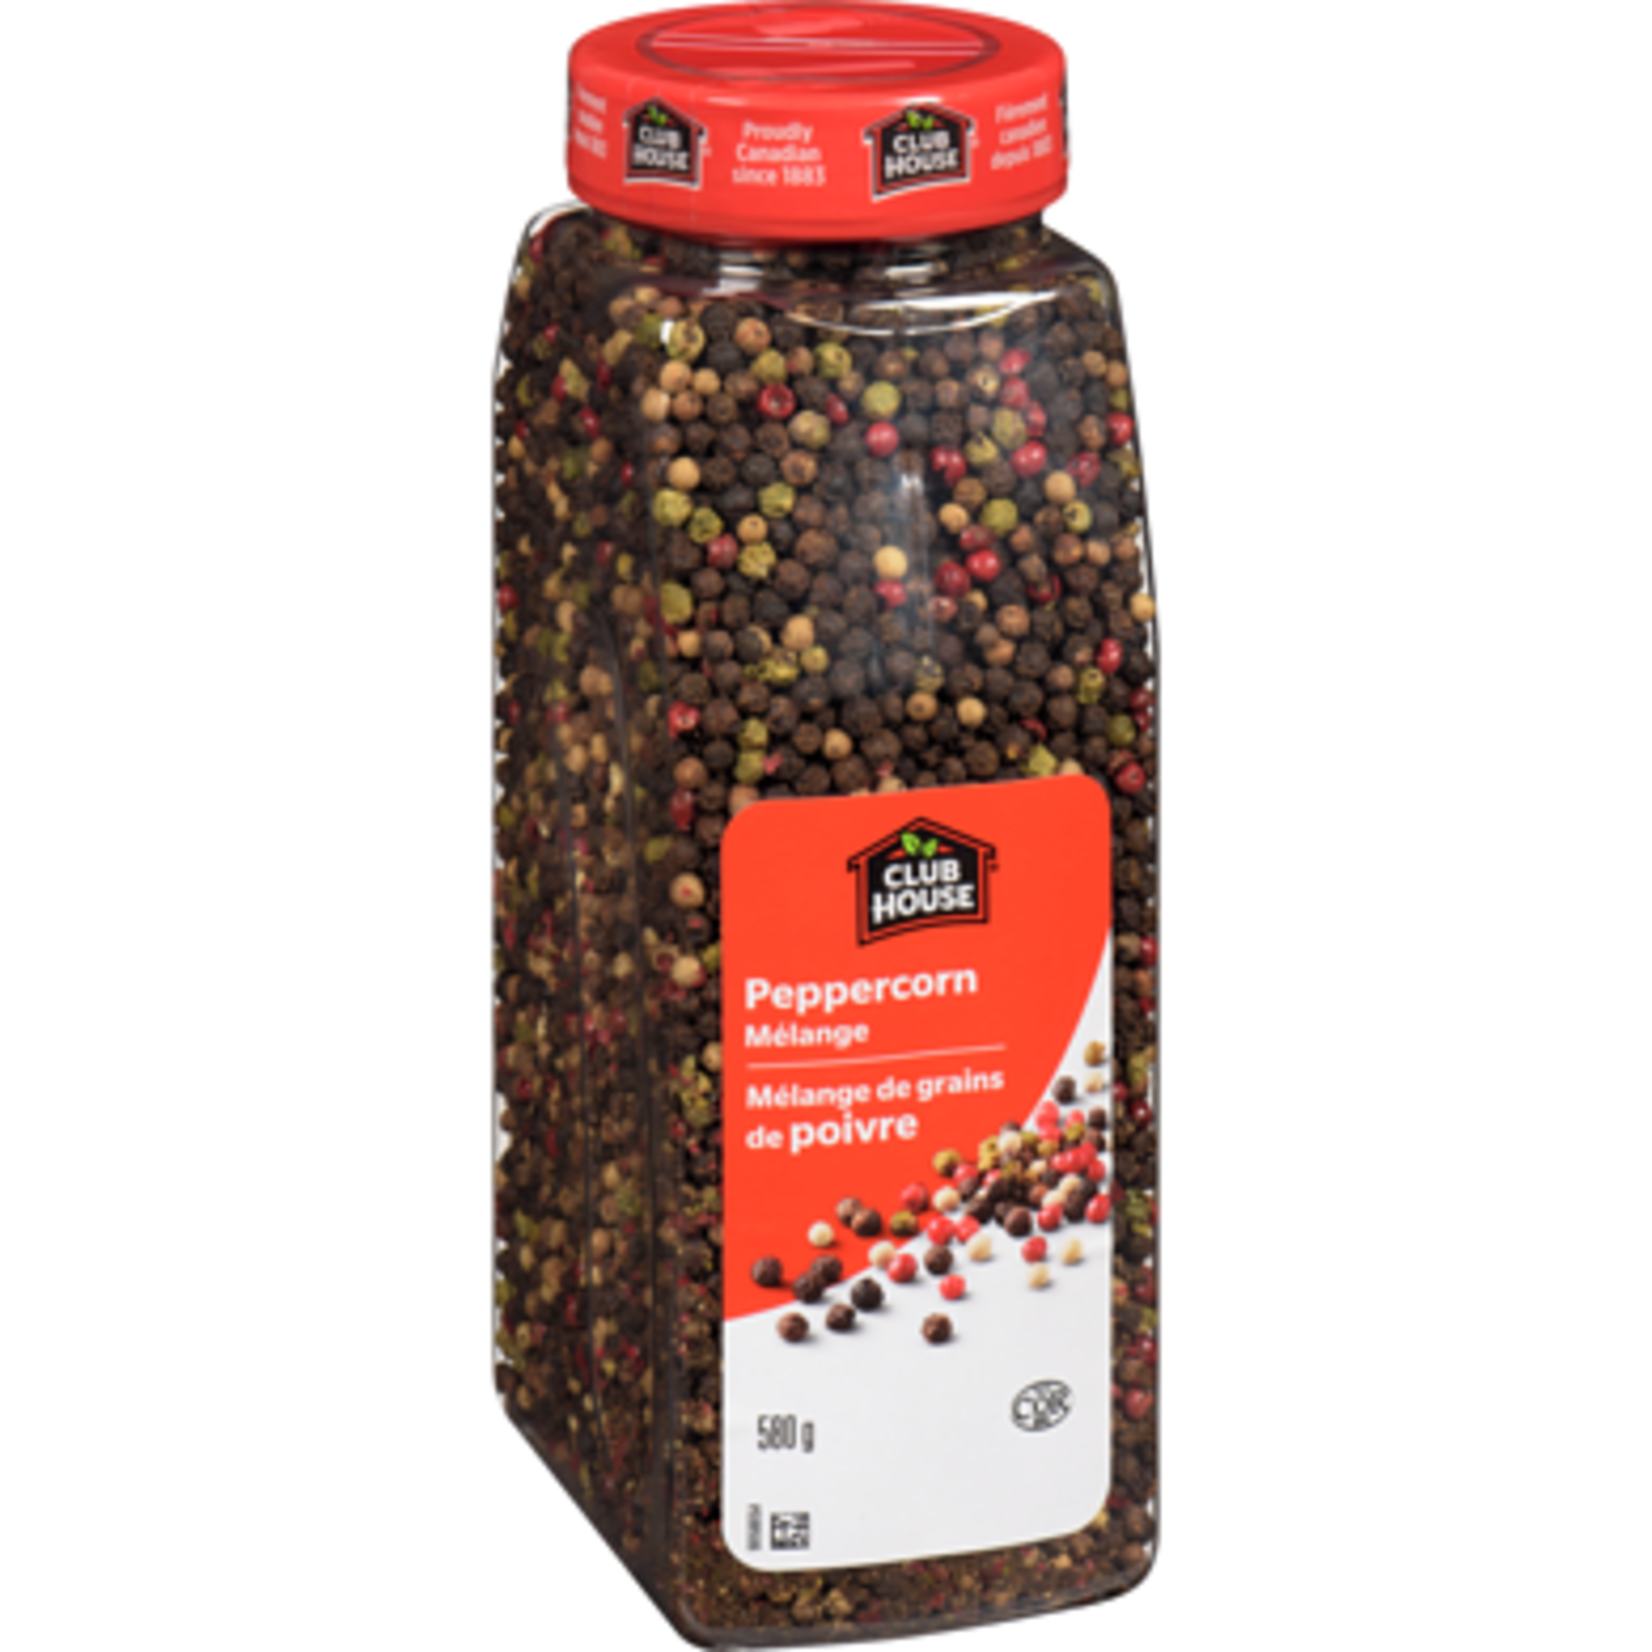 Clubhouse Peppercorn 580g